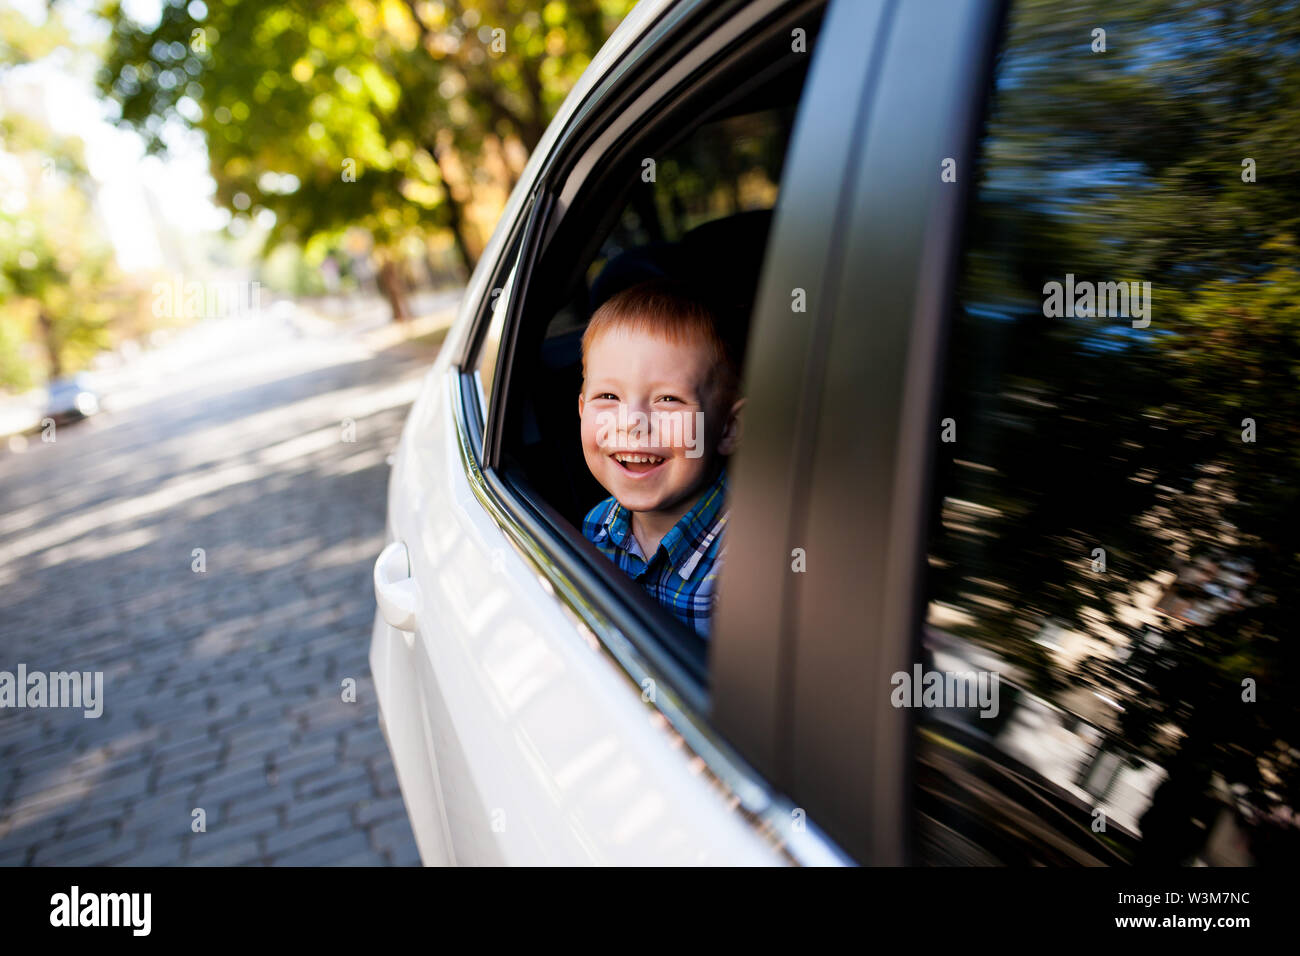 Adorable baby boy in the car. Laughing boy looks out of the car window. Stock Photo